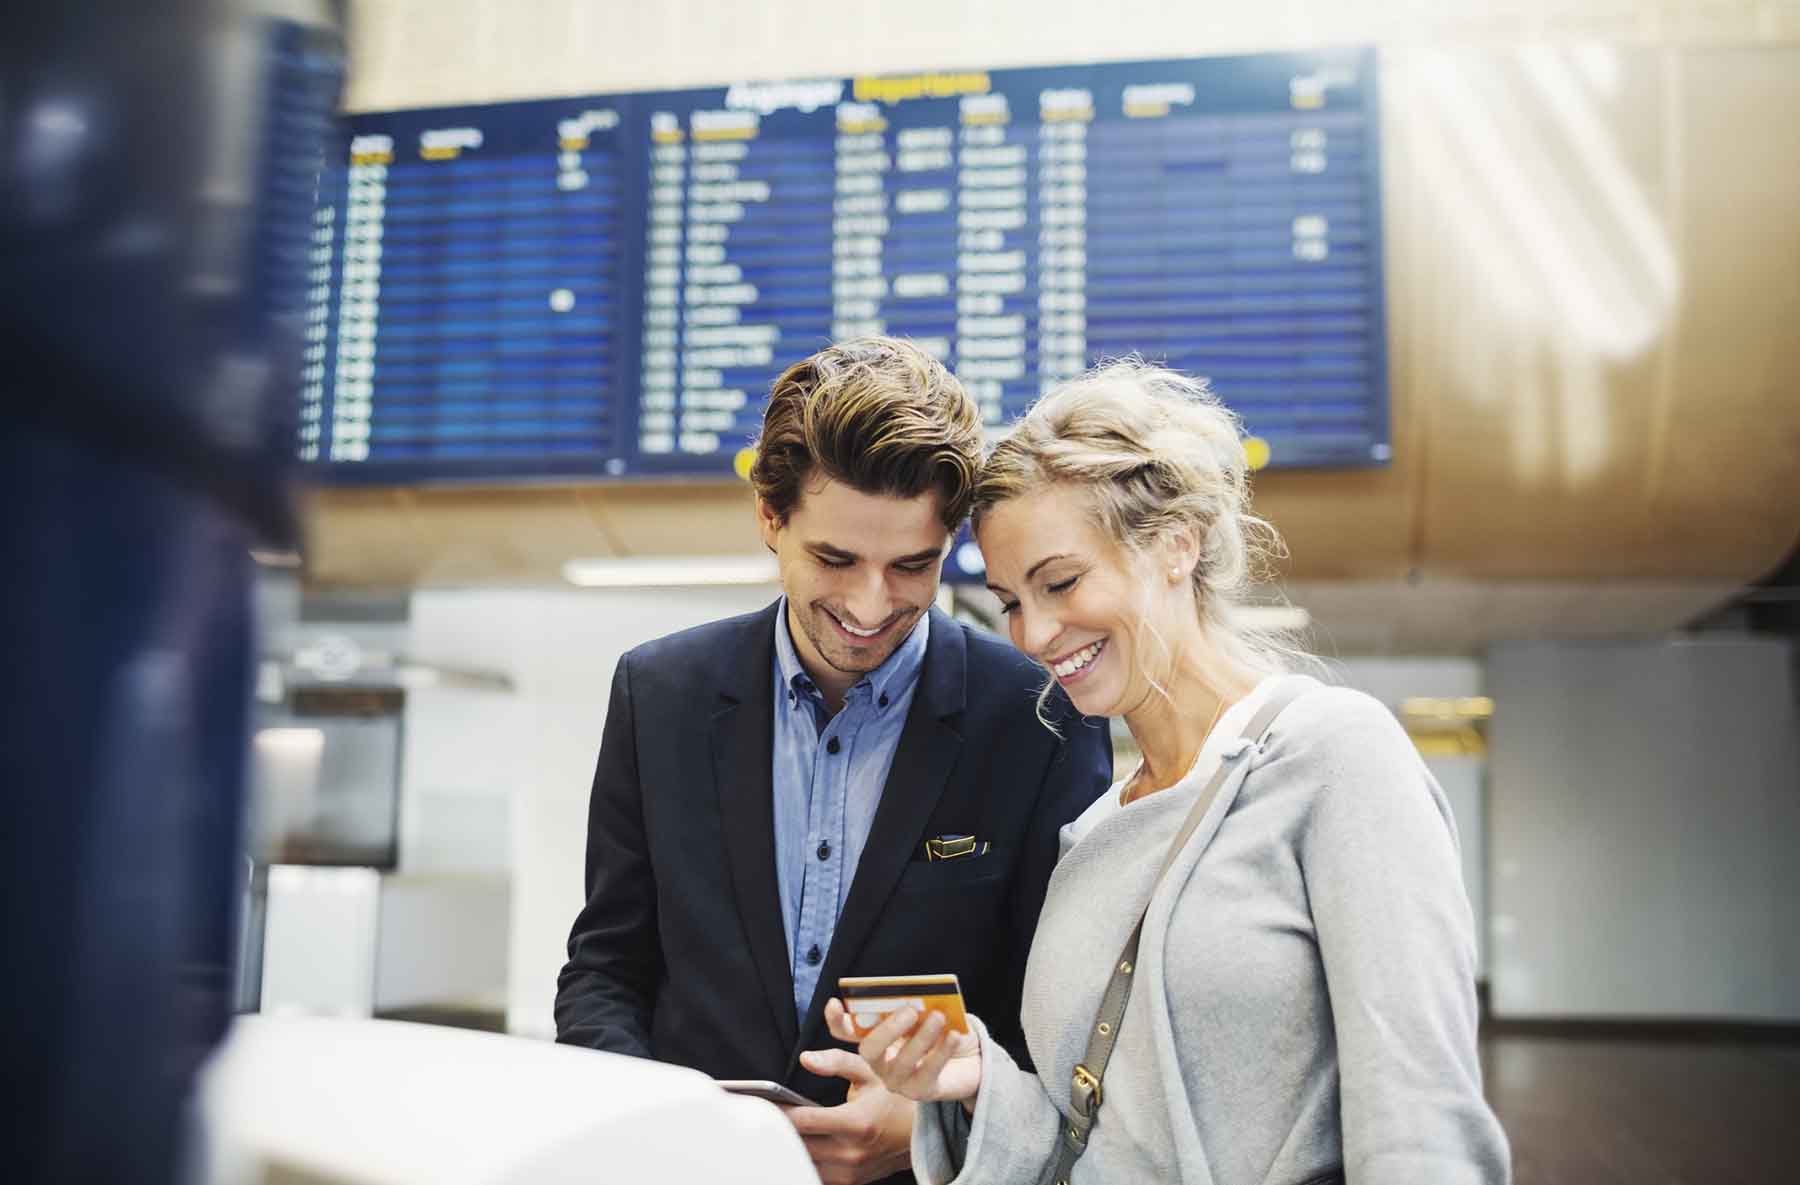 Choosing the Right Travel Credit Card to Fit Your Needs